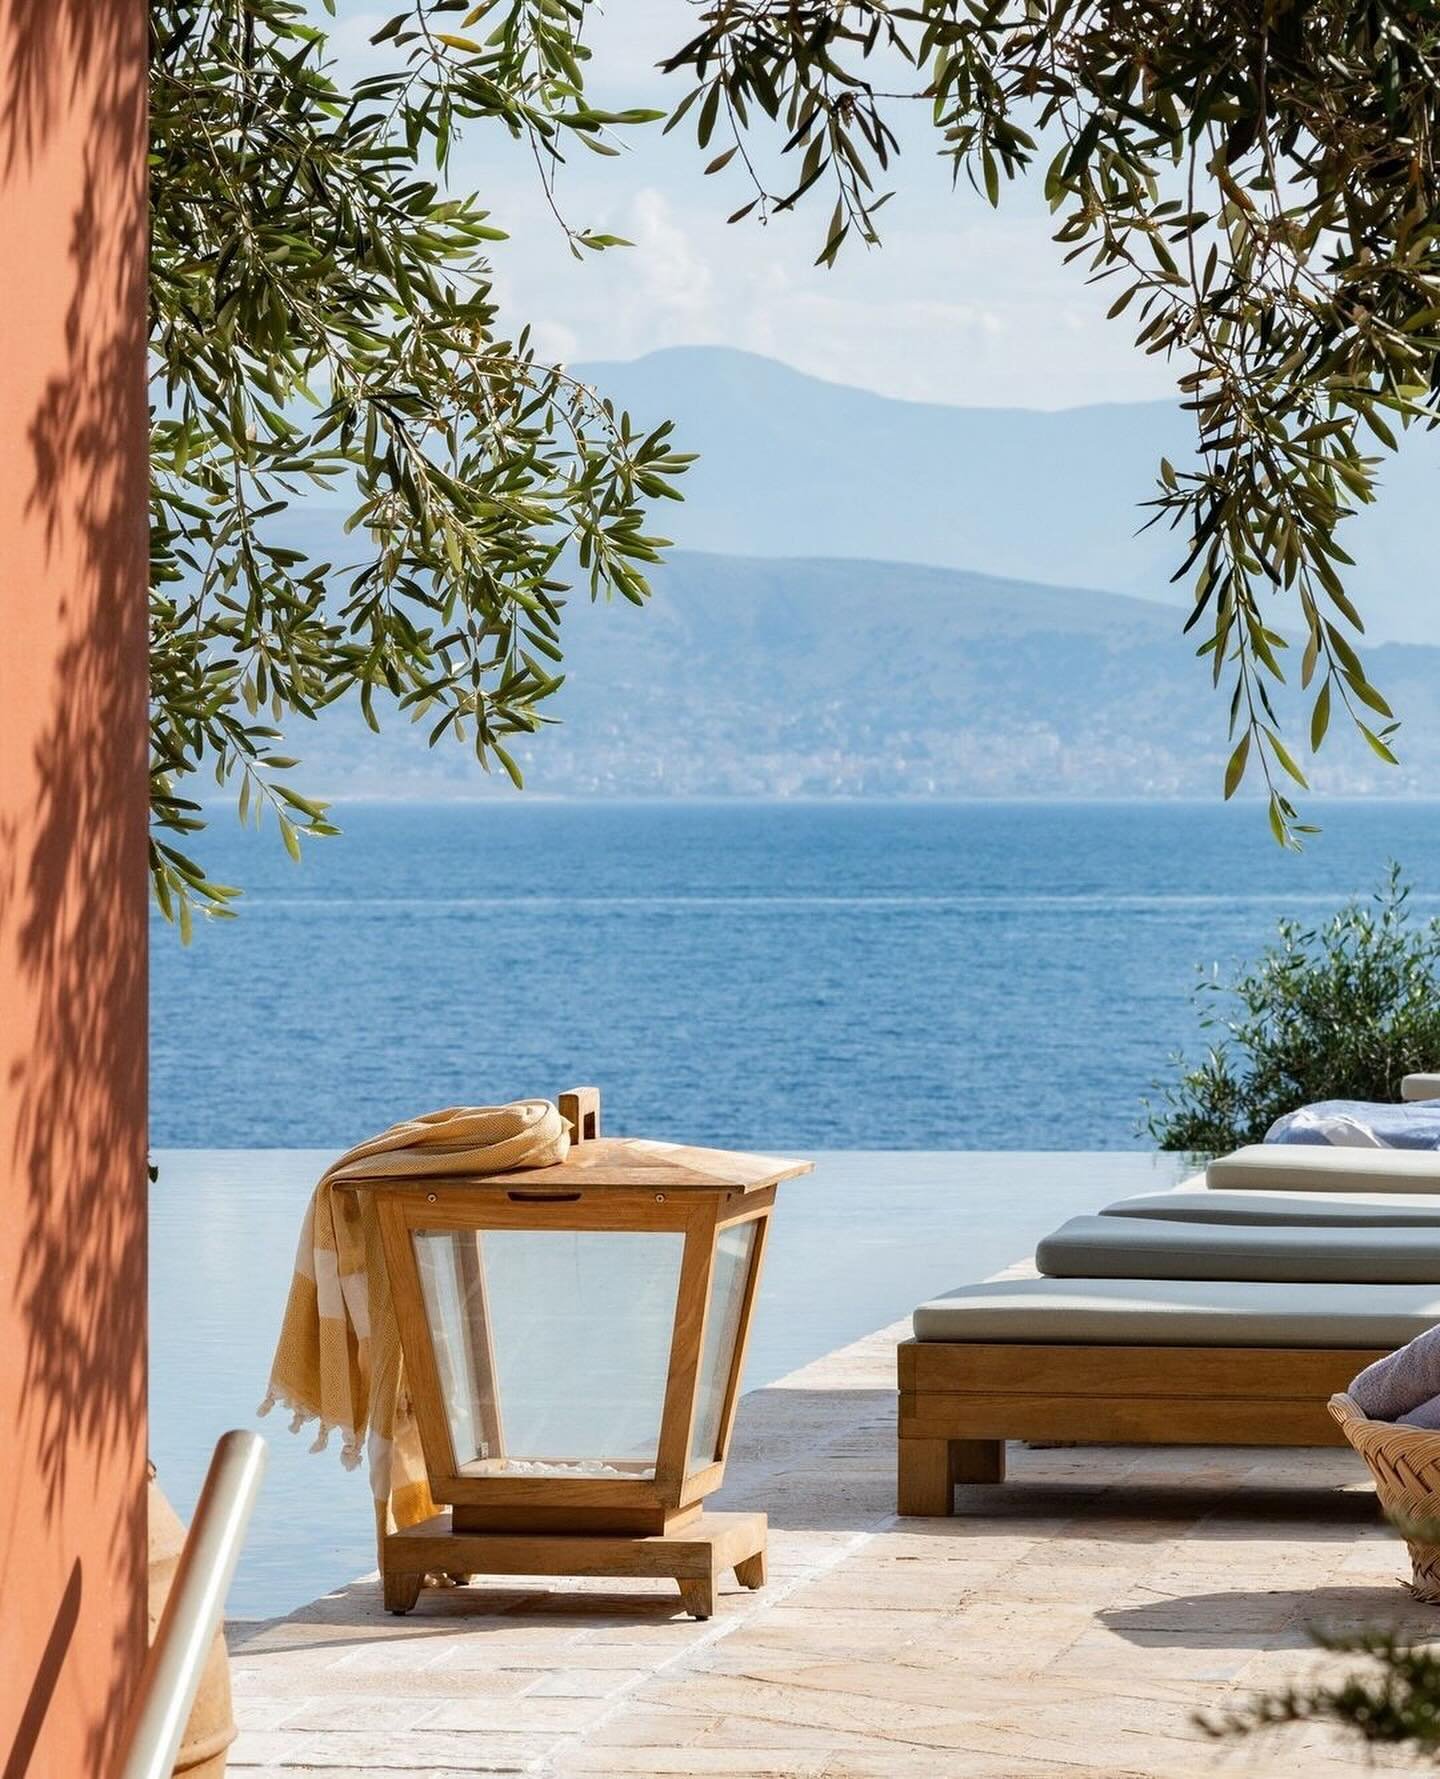 To be able to wake in the morning, steal down some steps and tiptoe into the Mediterranean &ndash; this is the dream. To help you find your perfect hideaway this summer, here is a collection of Europe&rsquo;s dreamiest villas by the sea.⁠
⁠
⁠
📍 Souk